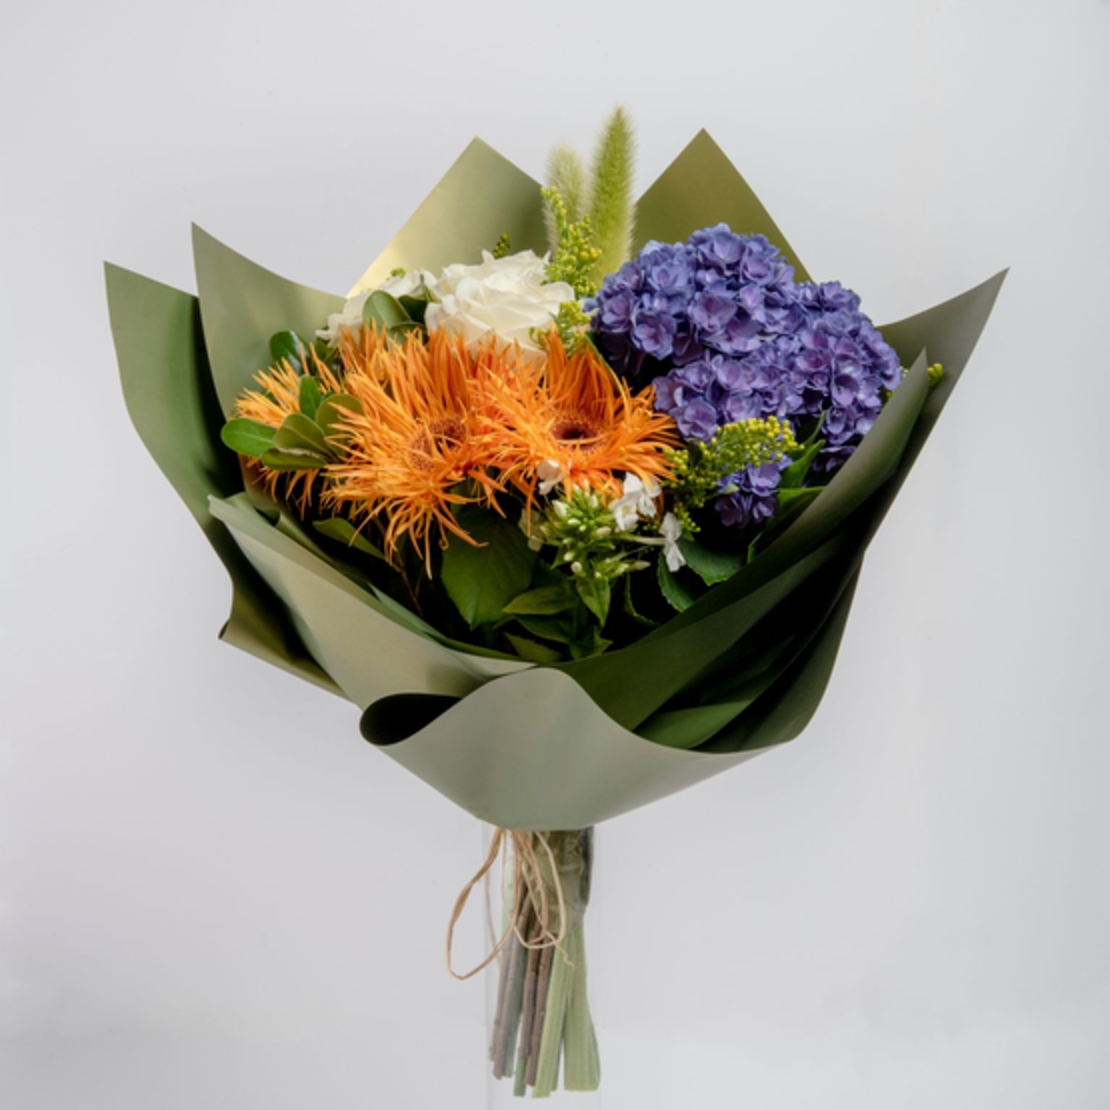 A bouquet of flowers in a European style